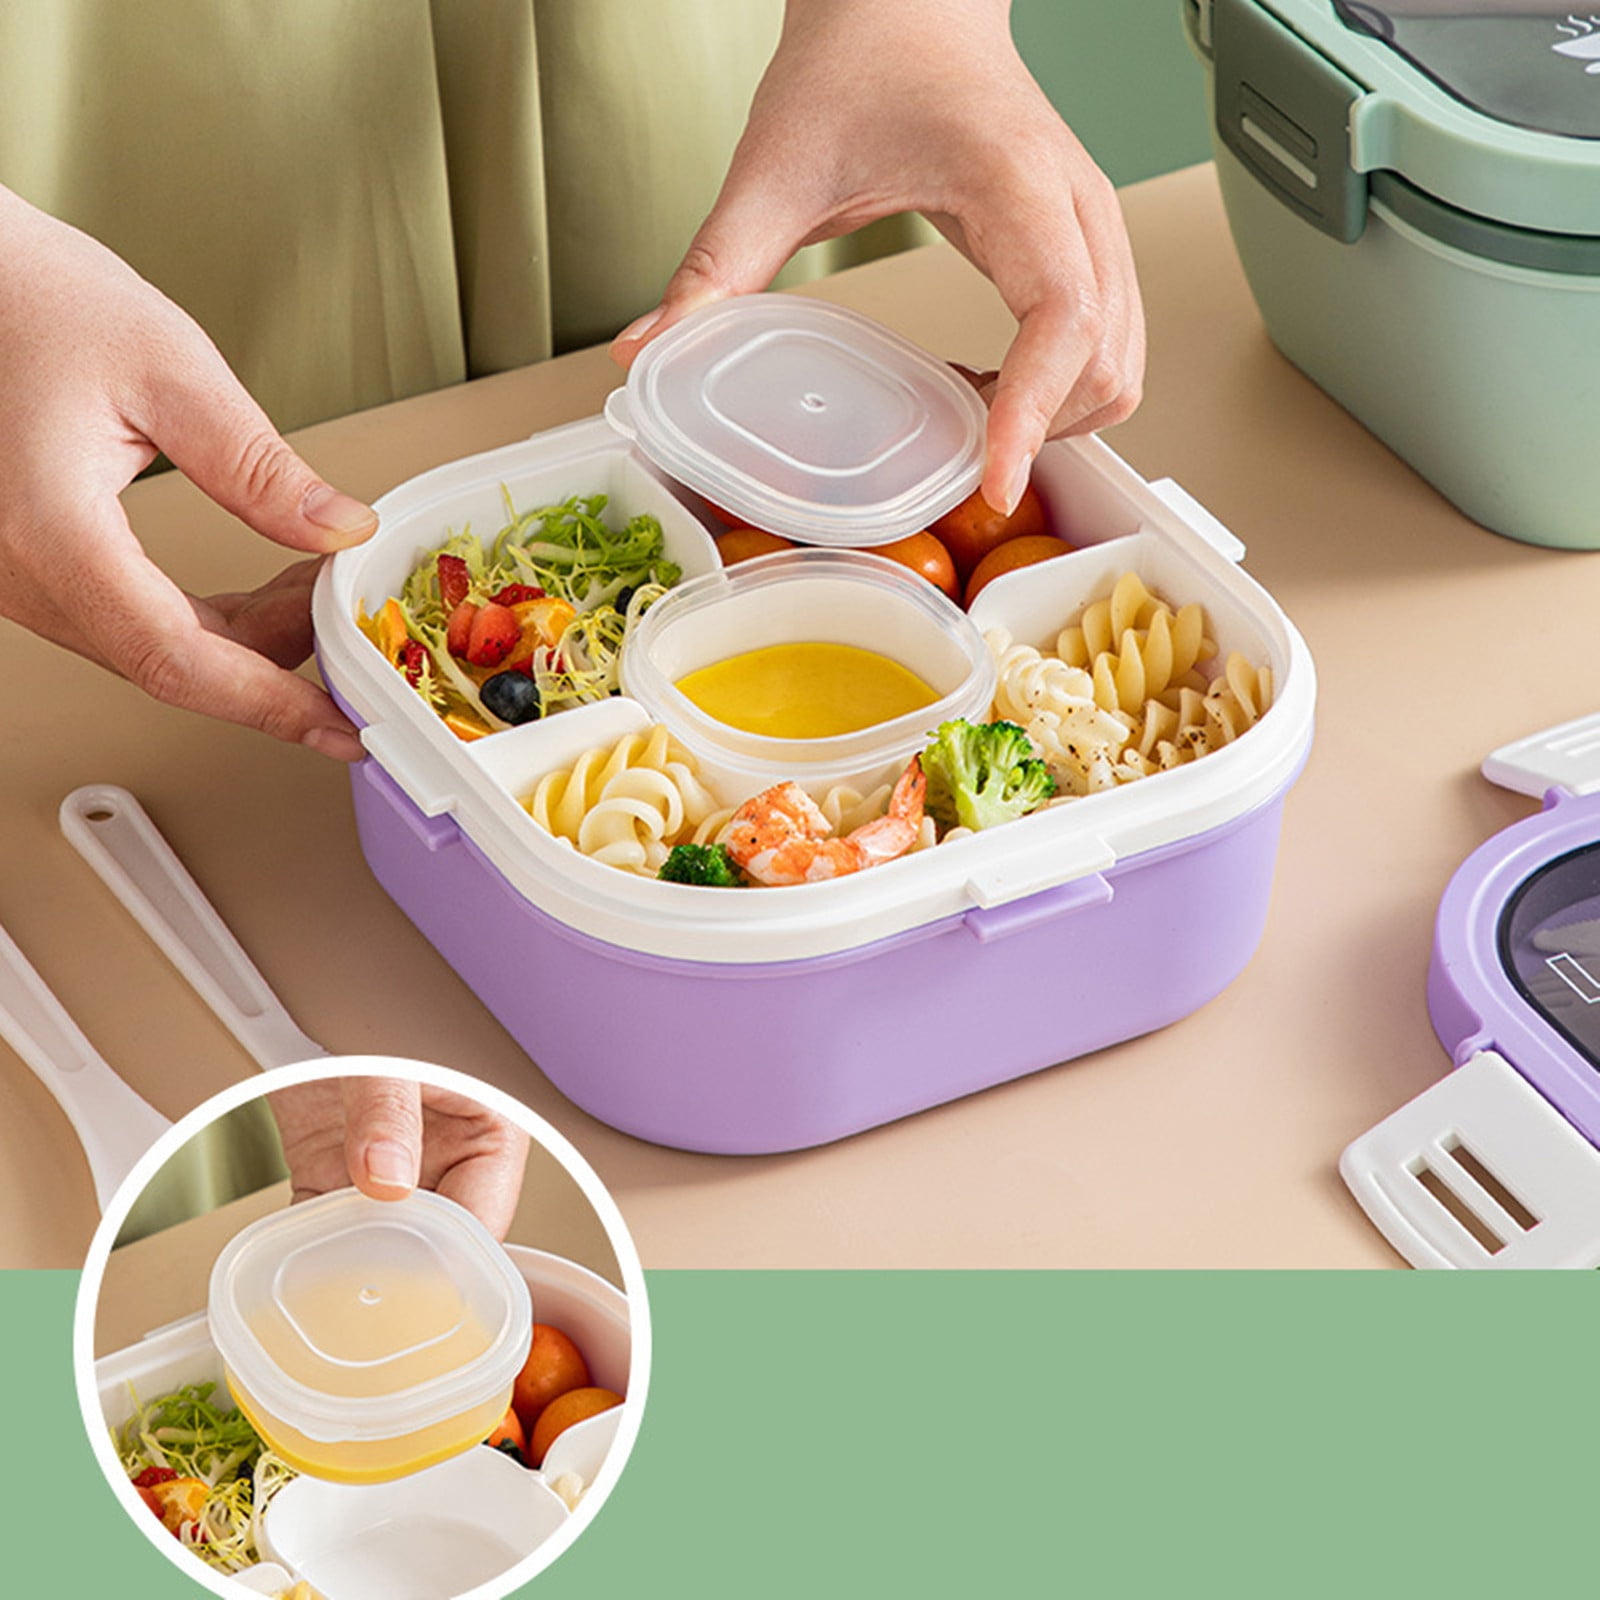 Box Lunch Free Kids 4 For Durable BPA Containers Meal Reusable Containers  Lunch Food Compartment Bento Box Storage Schools Prep - AliExpress